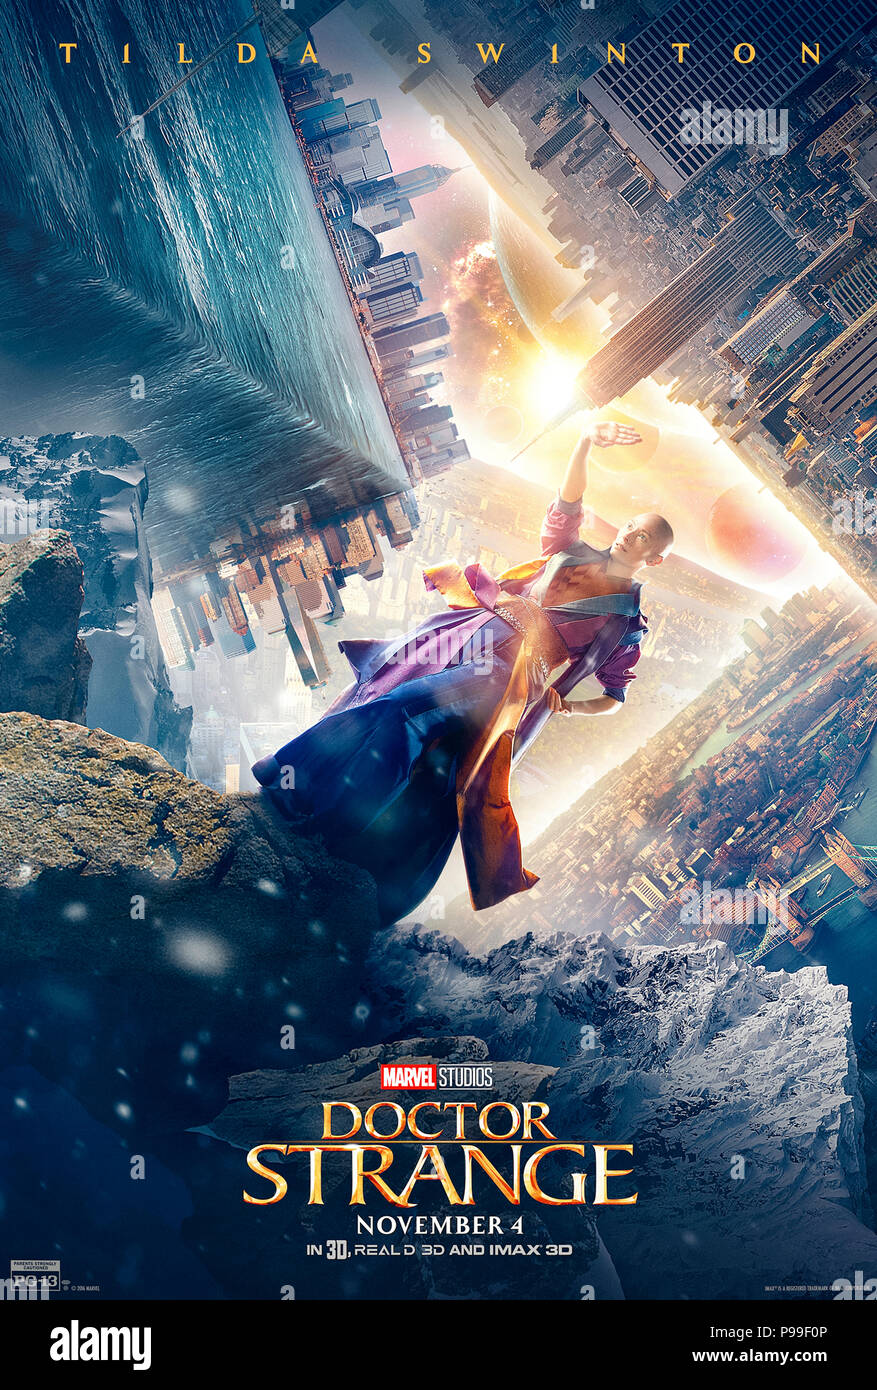 Doctor Strange (2016) directed by Scott Derrickson. Character poster showing The Ancient One played by Tilda Swinton. Stock Photo